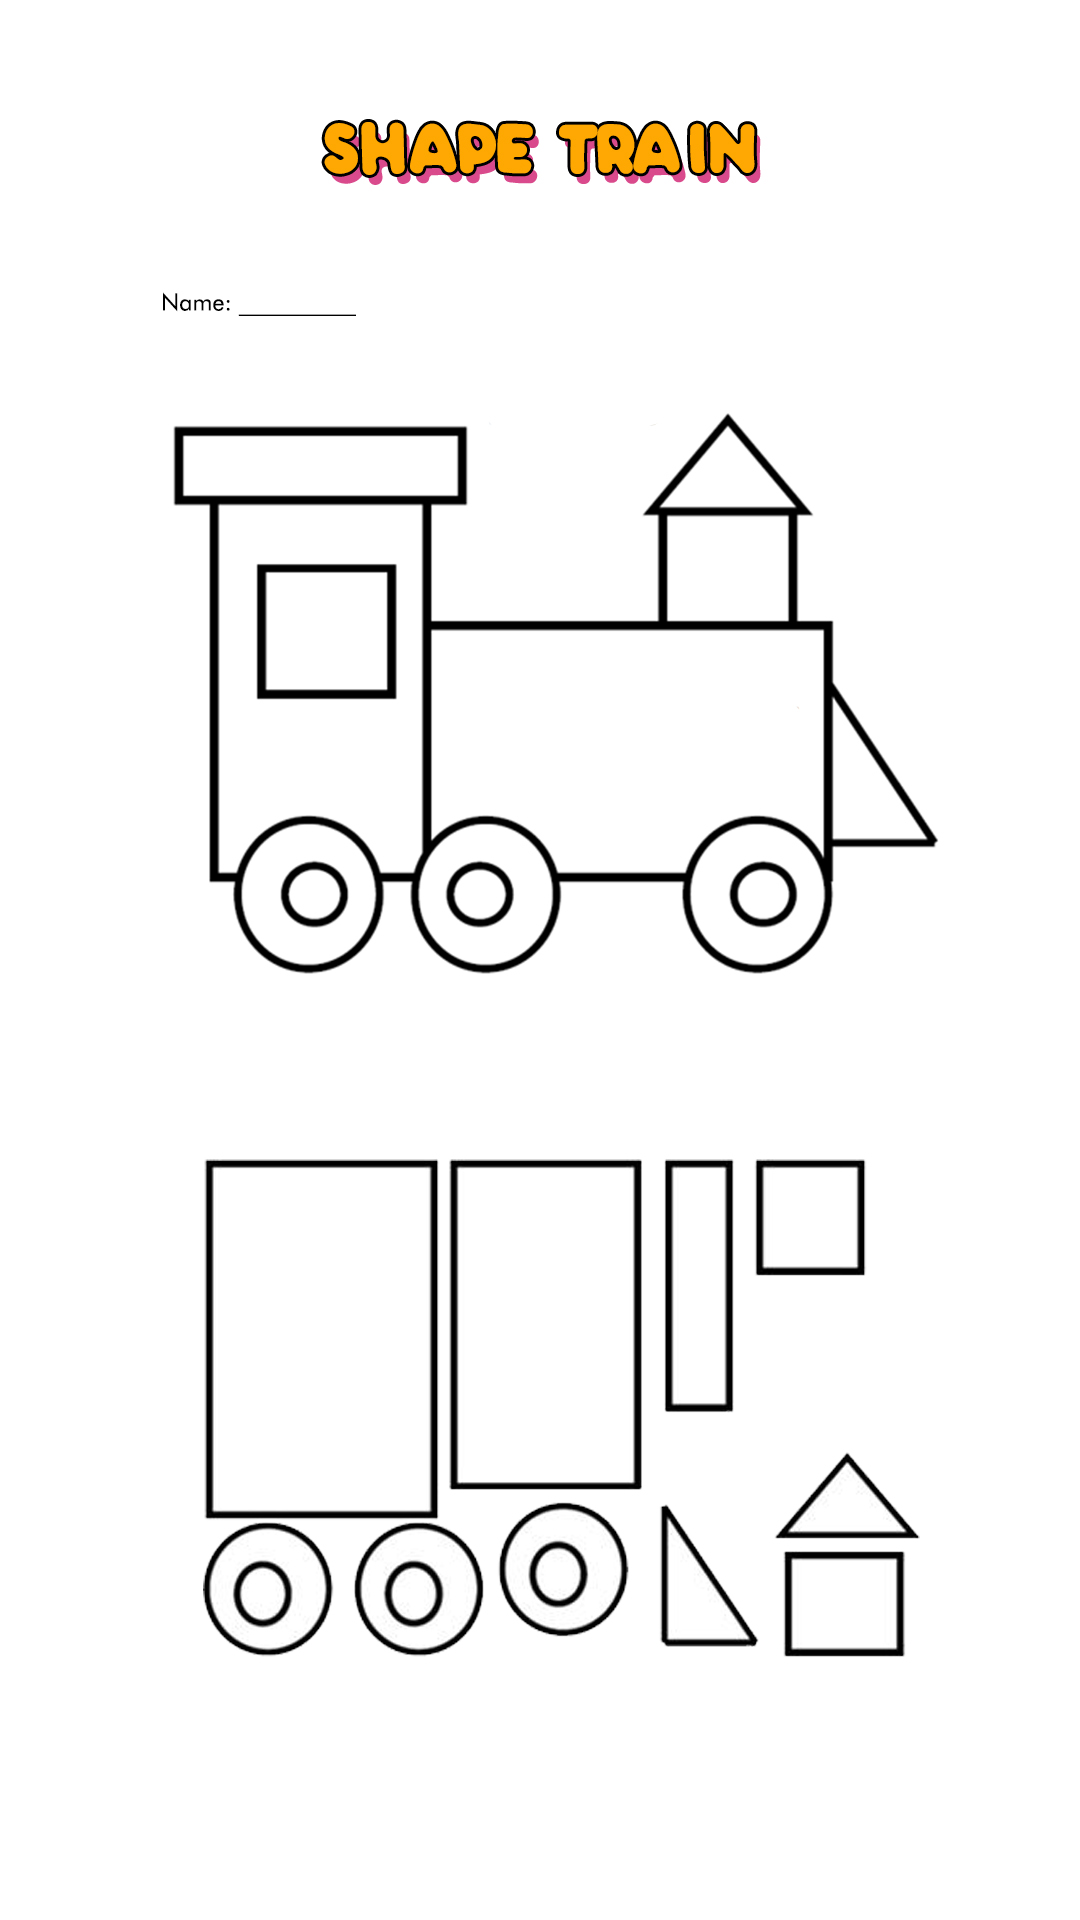 Train Shapes to Cut Out Image